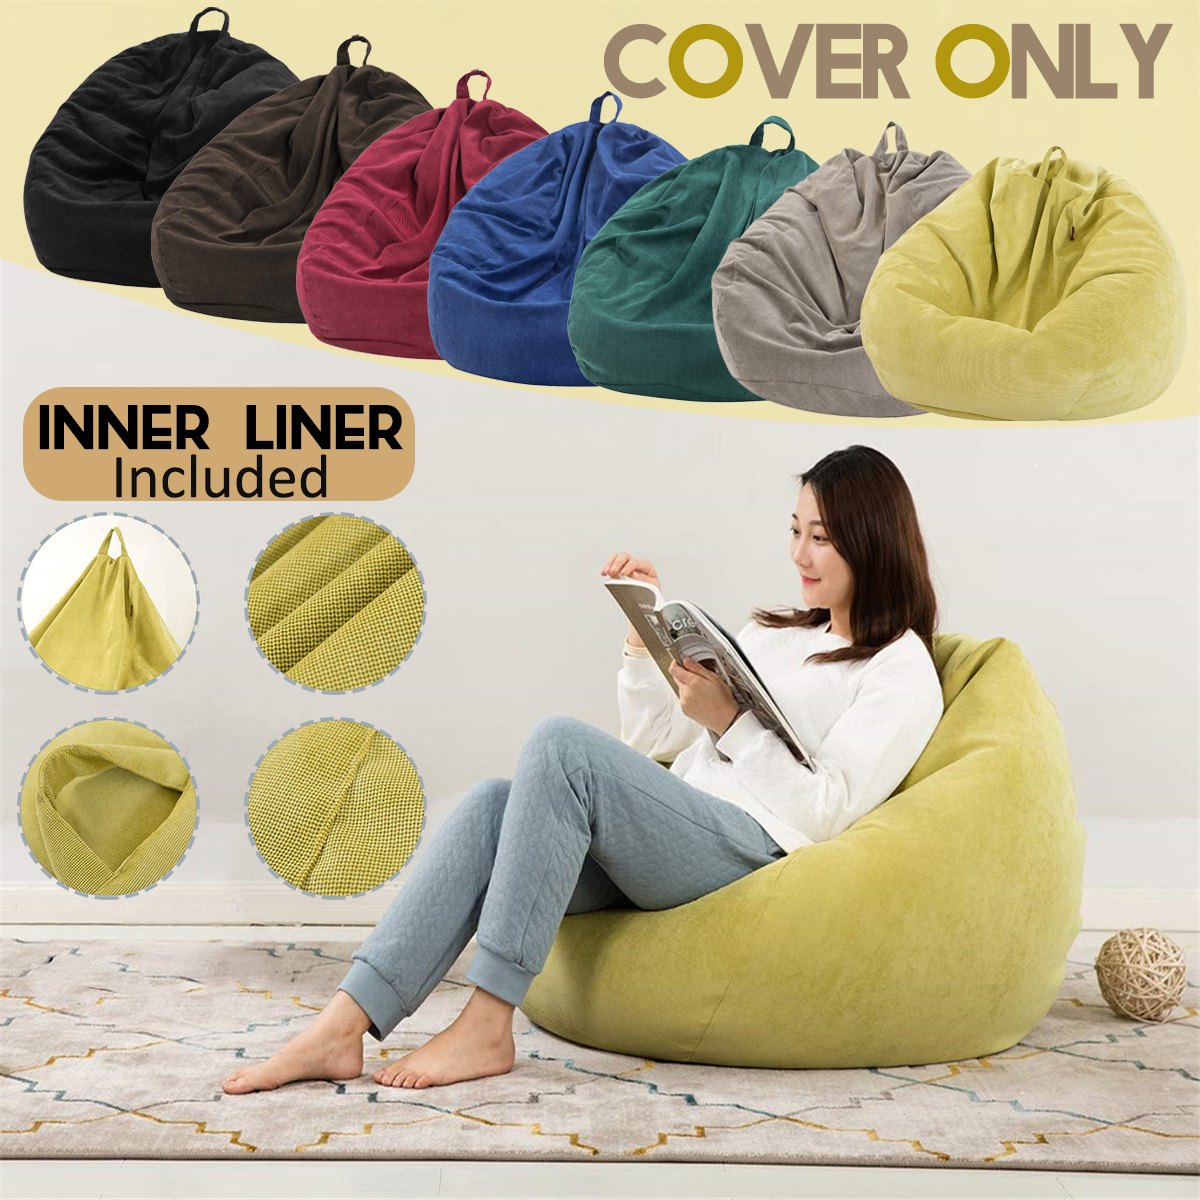 Corduroy Bean Bag Chair 70*80cm Multicolor Gaming Sofa Cover Indoor Lazy Sofa With Mesh Bag Liner Cover 26